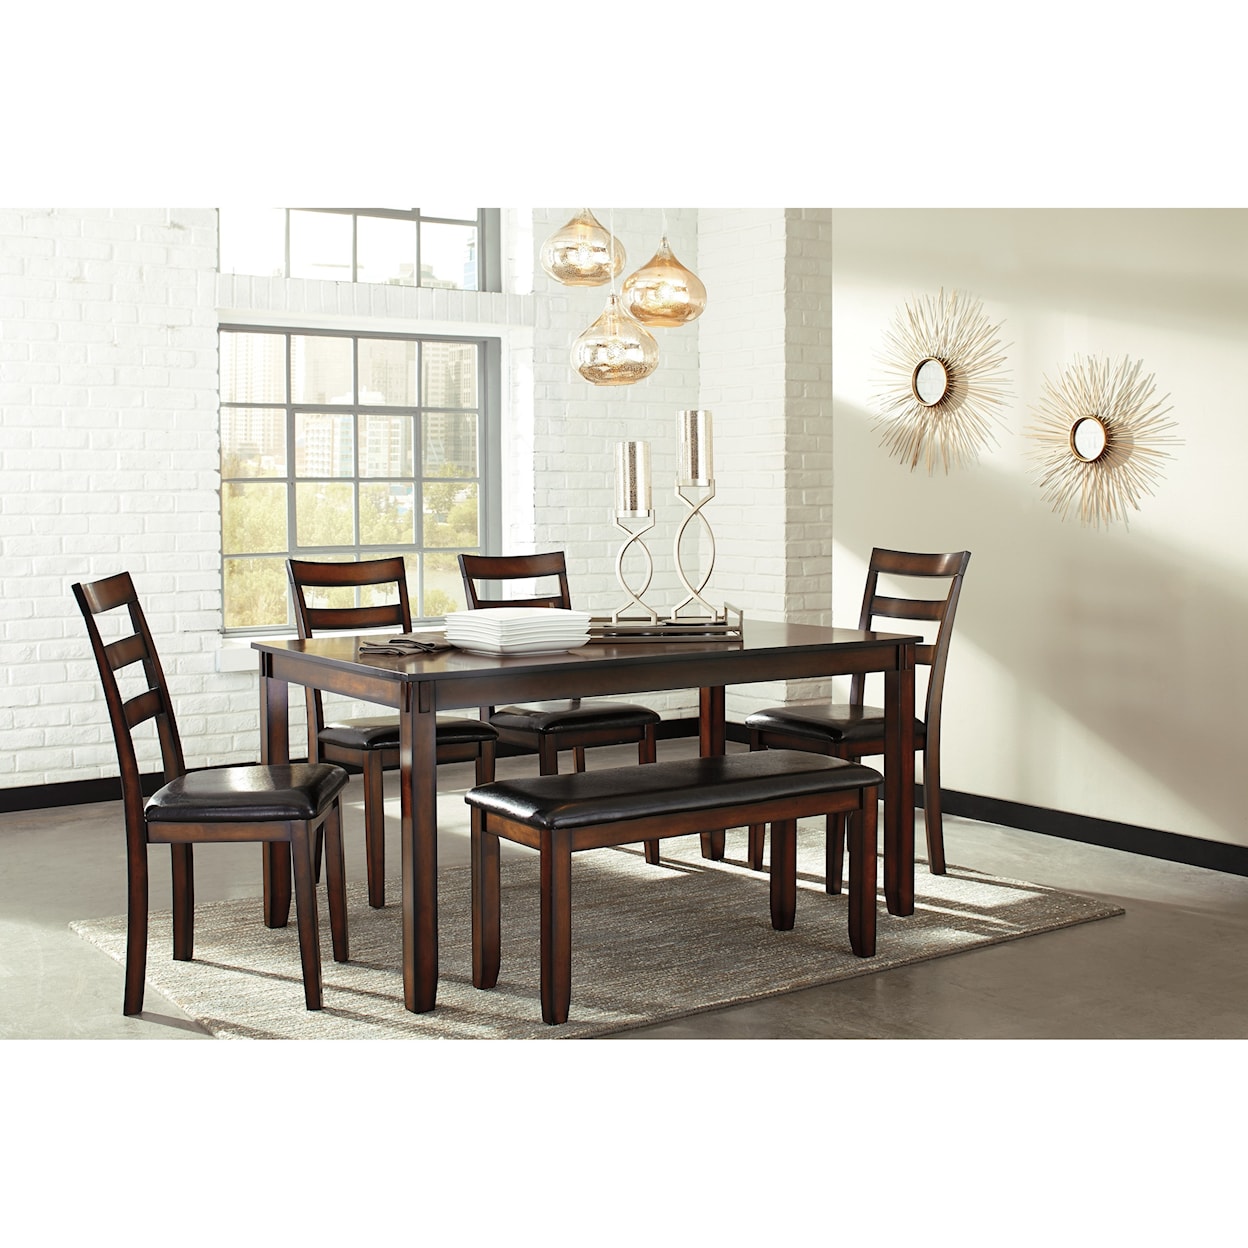 Signature Design by Ashley Furniture Coviar 6-Piece Dining Room Table Set